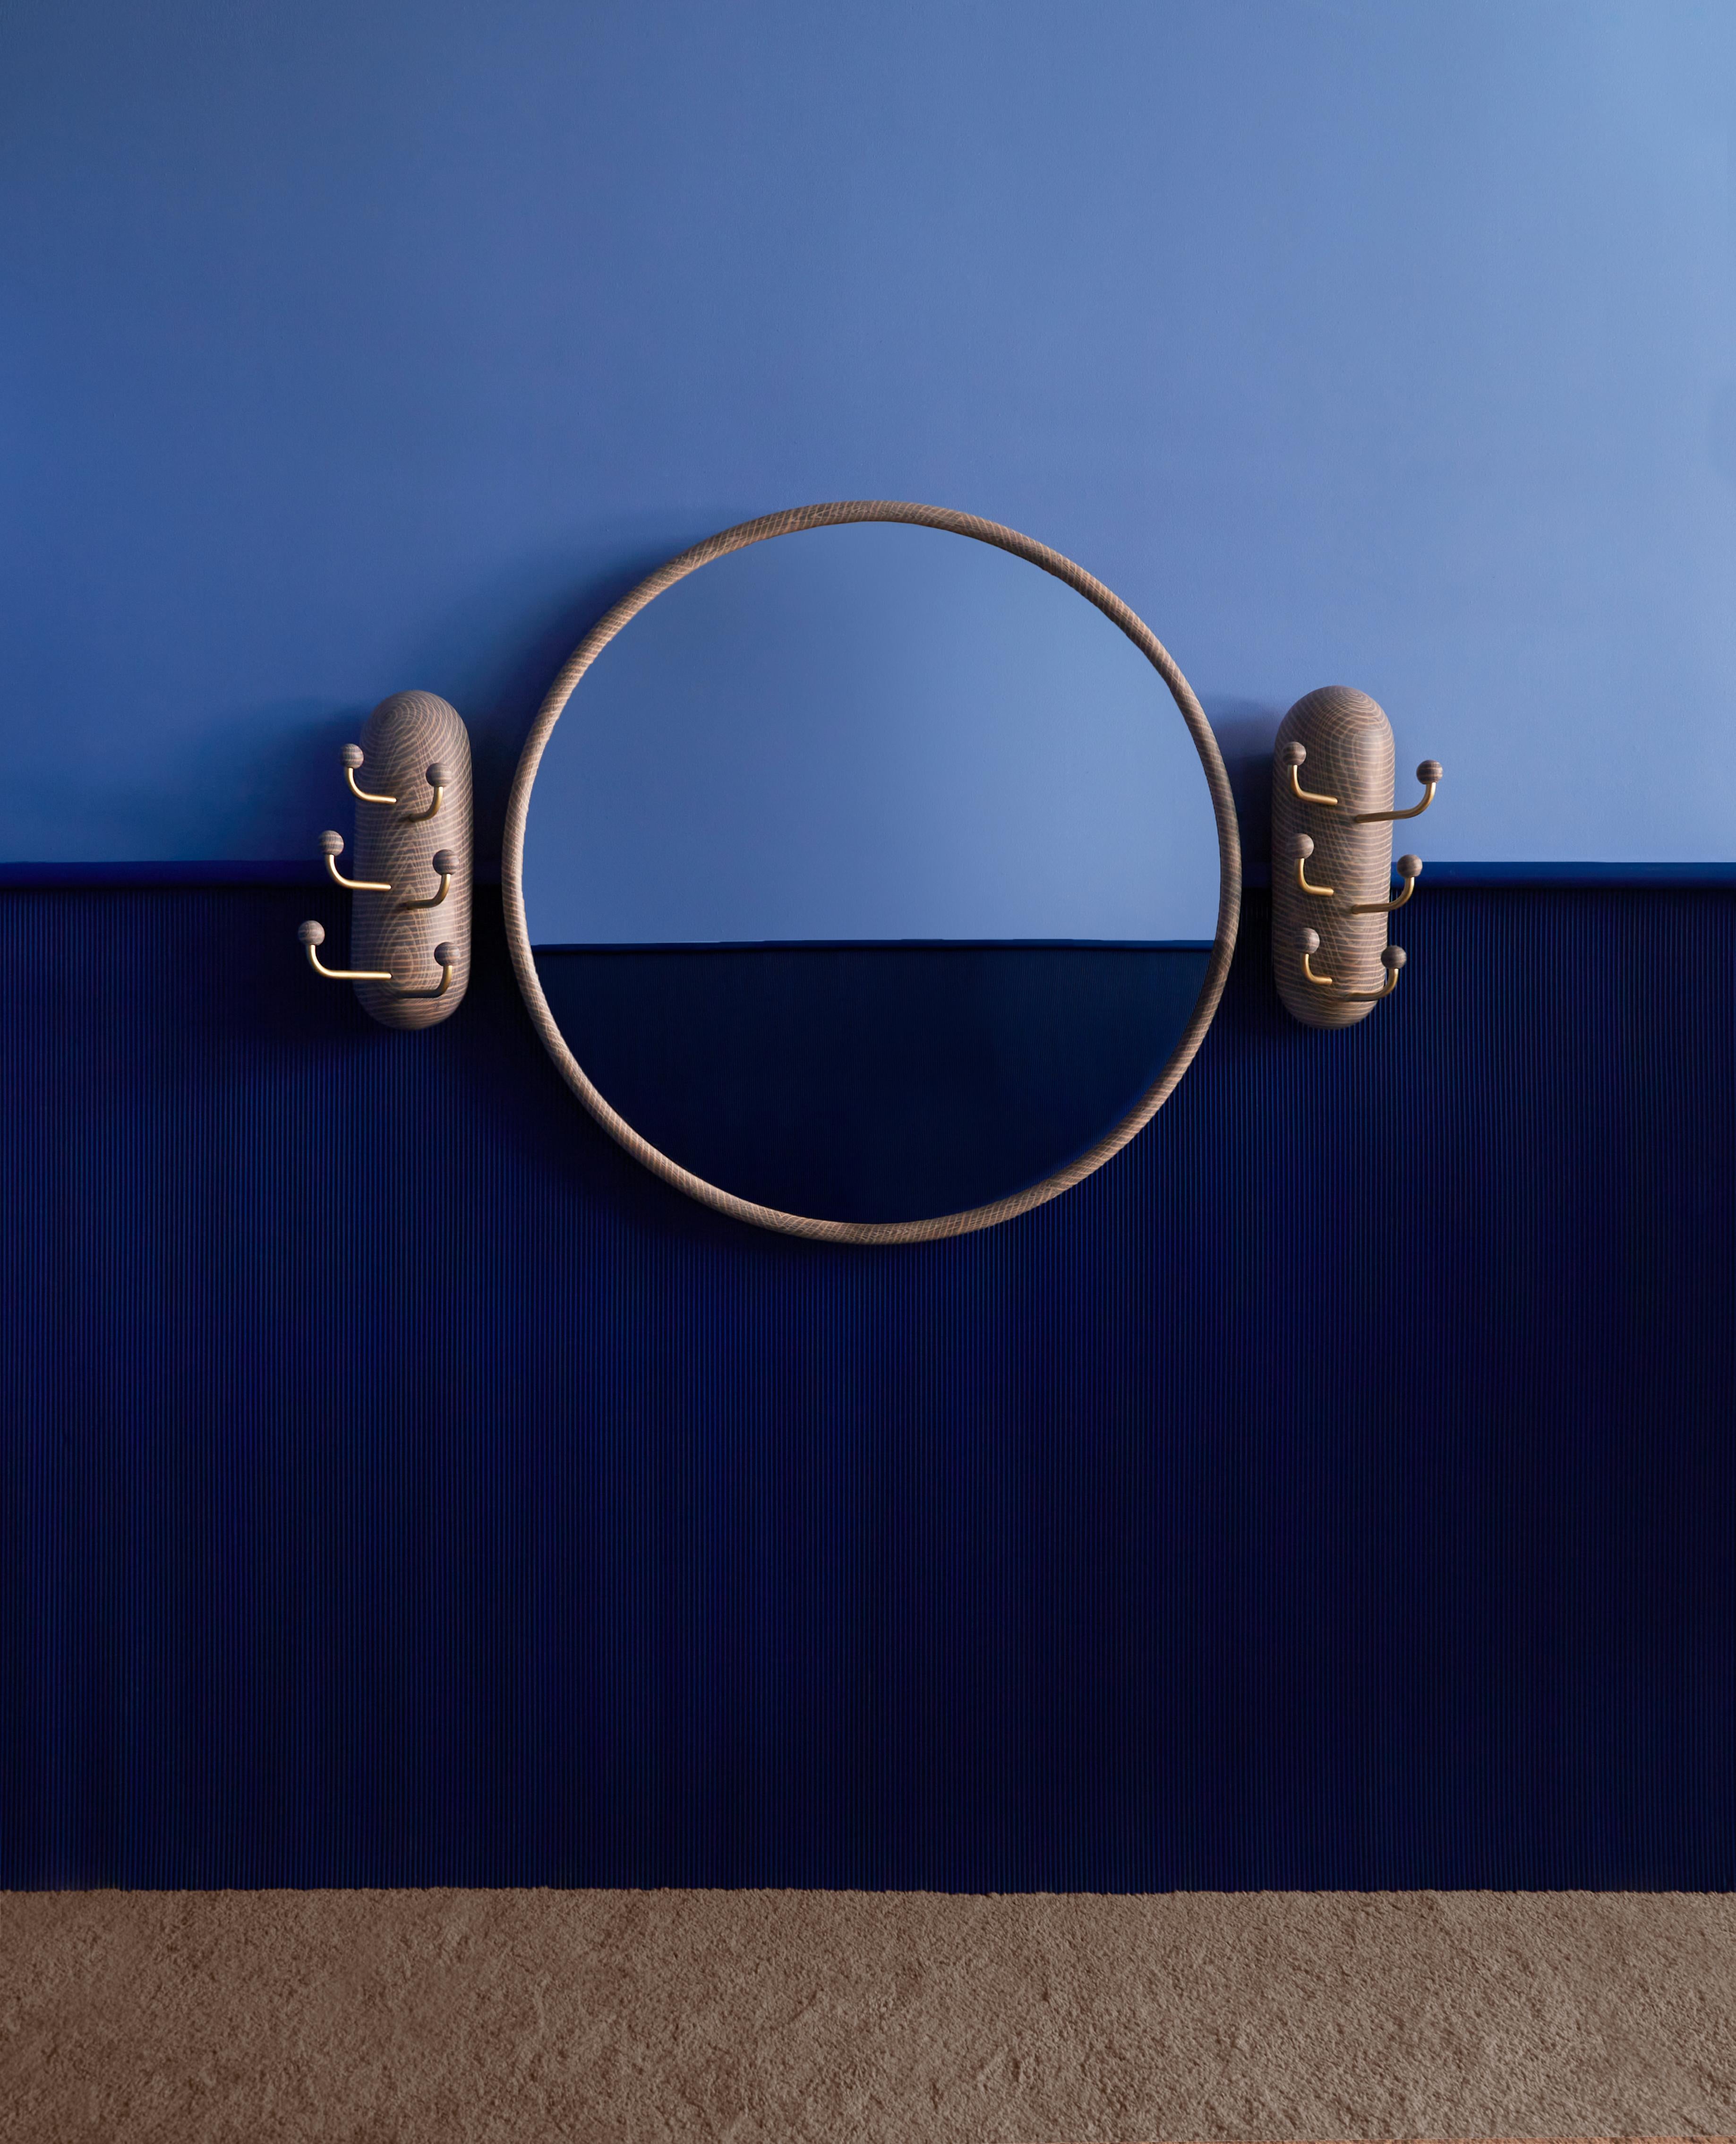 Thing 1 & 2 by Hamilton Holmes
Oxalino Collection
2020
Dimensions: H 58.8, W 17.8 projection 10.16-20.3 cm
Materials: White oak, brass tube, oxidized treatment

Two playful wall hanging hooks that mirror each other’s eccentricities. The white